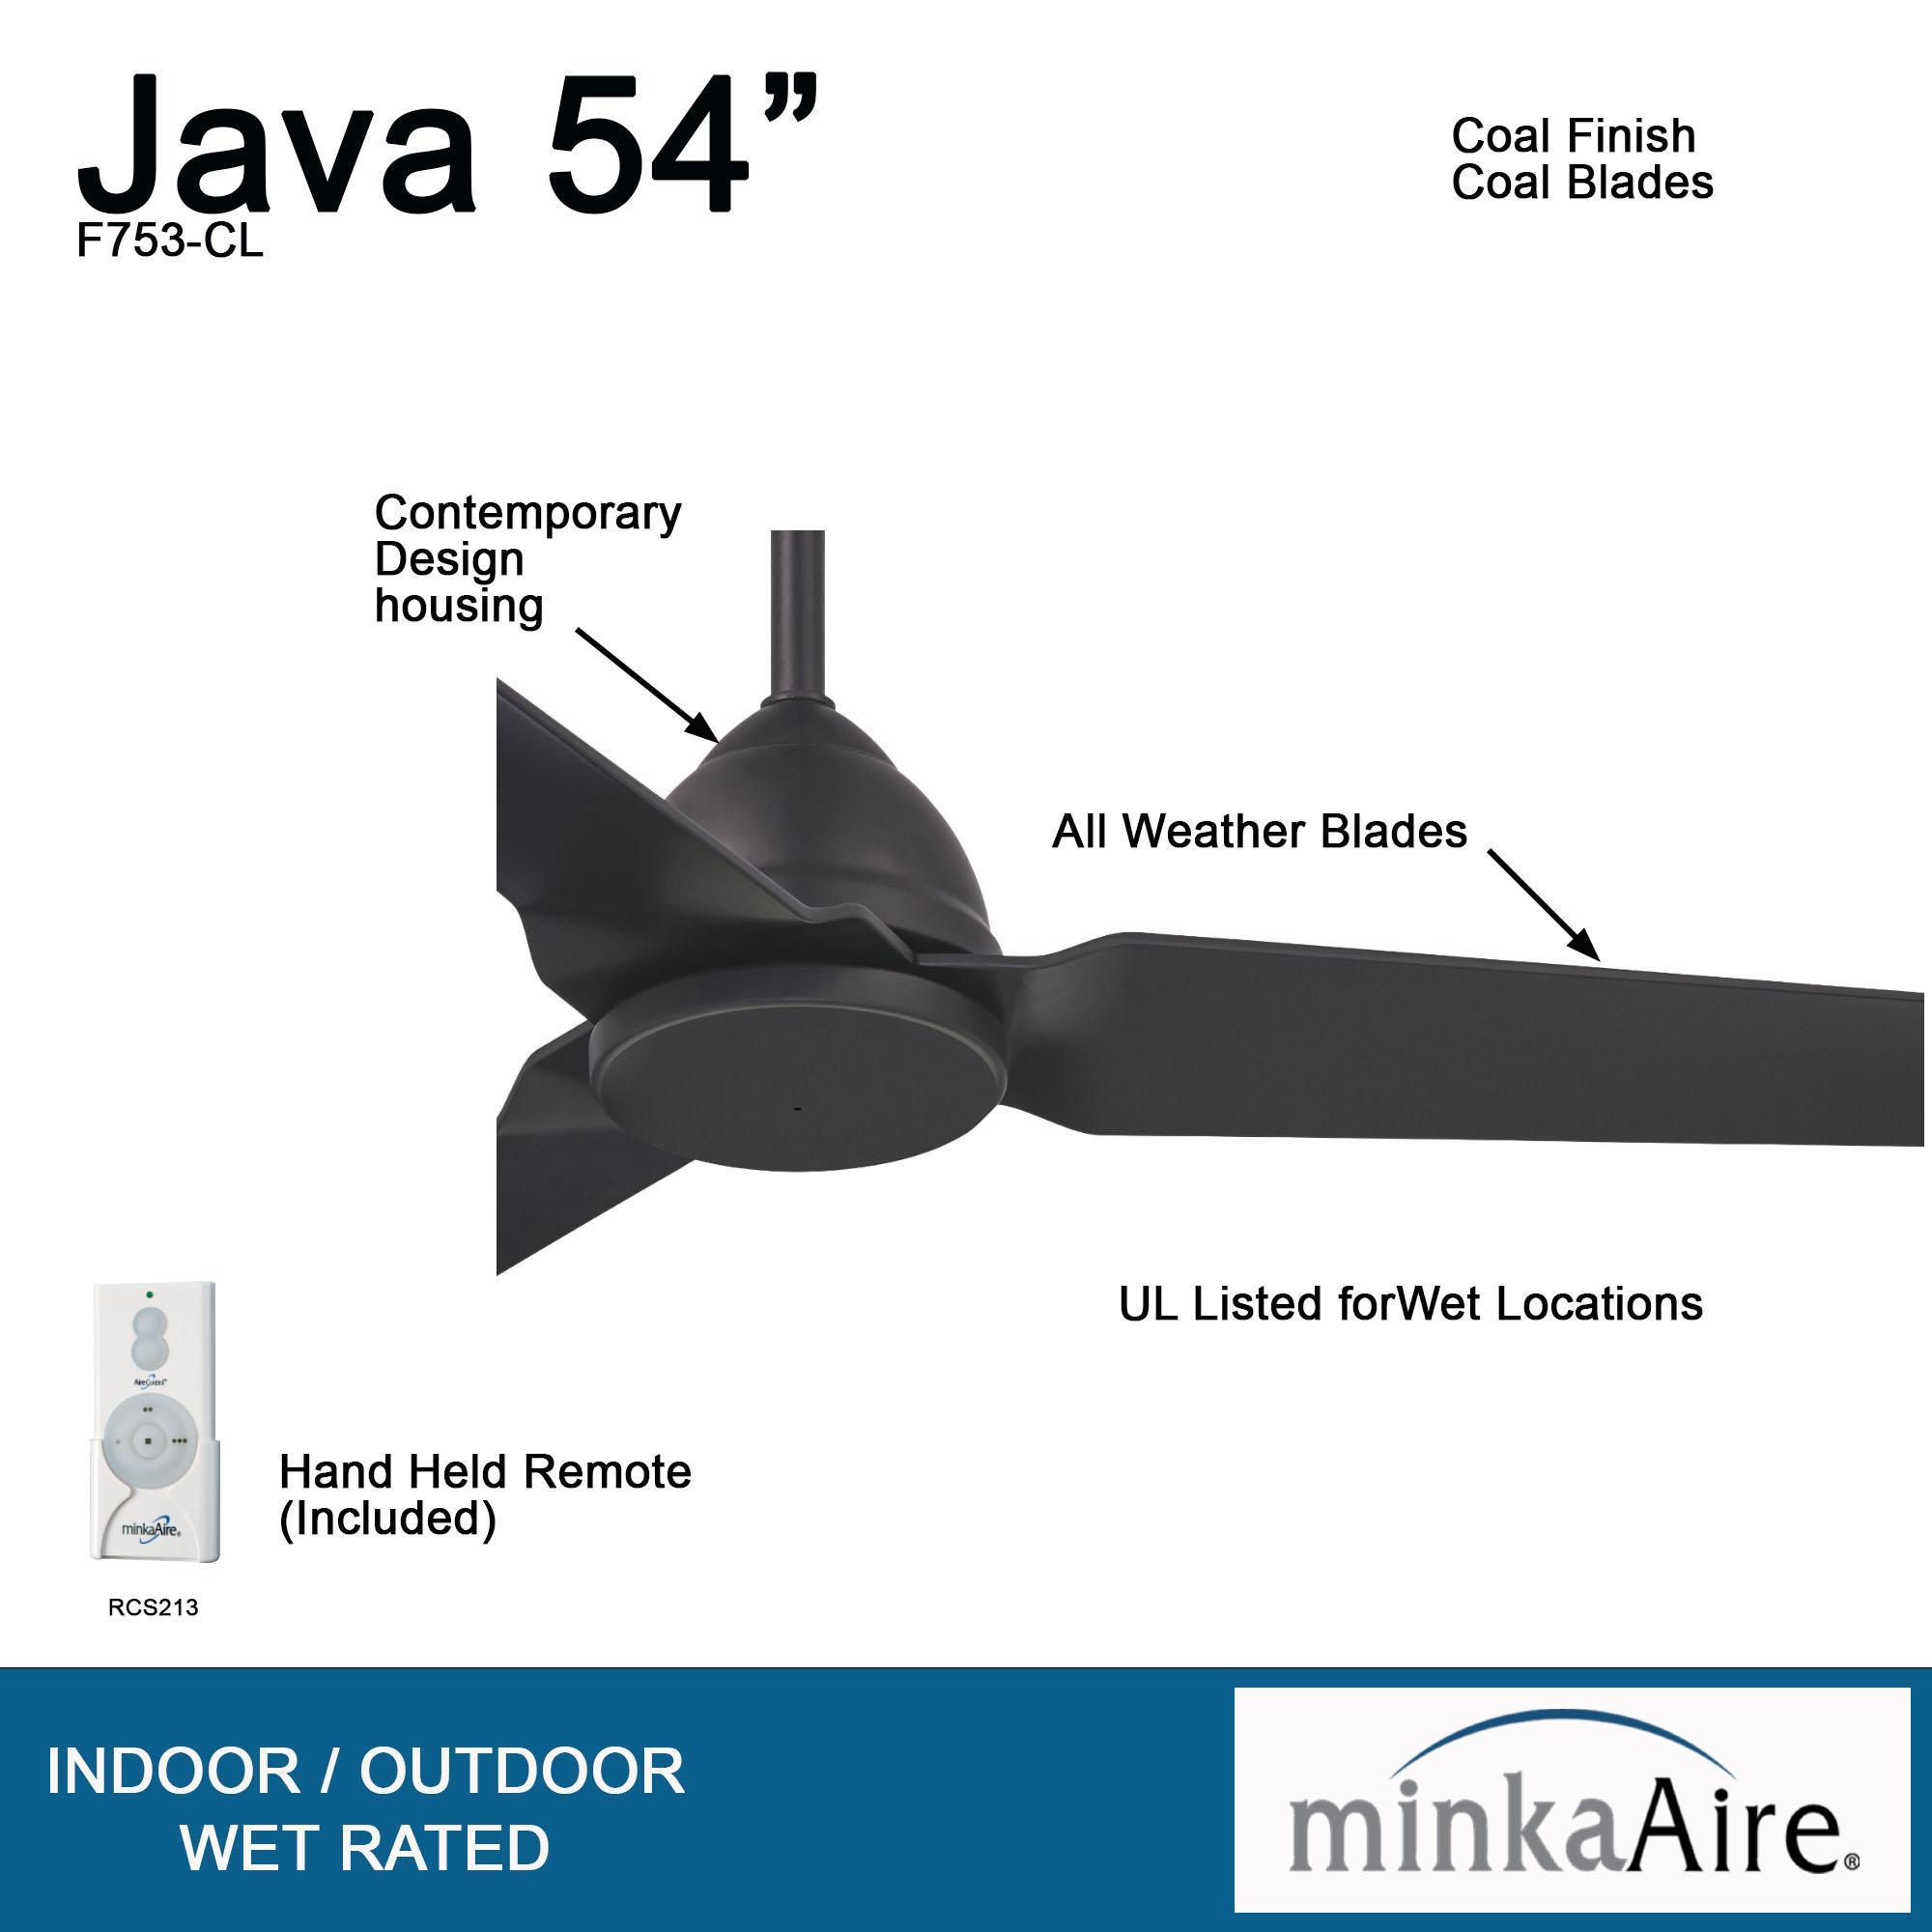 Java 54 Inch Propeller Outdoor Ceiling Fan With Remote, Coal Finish